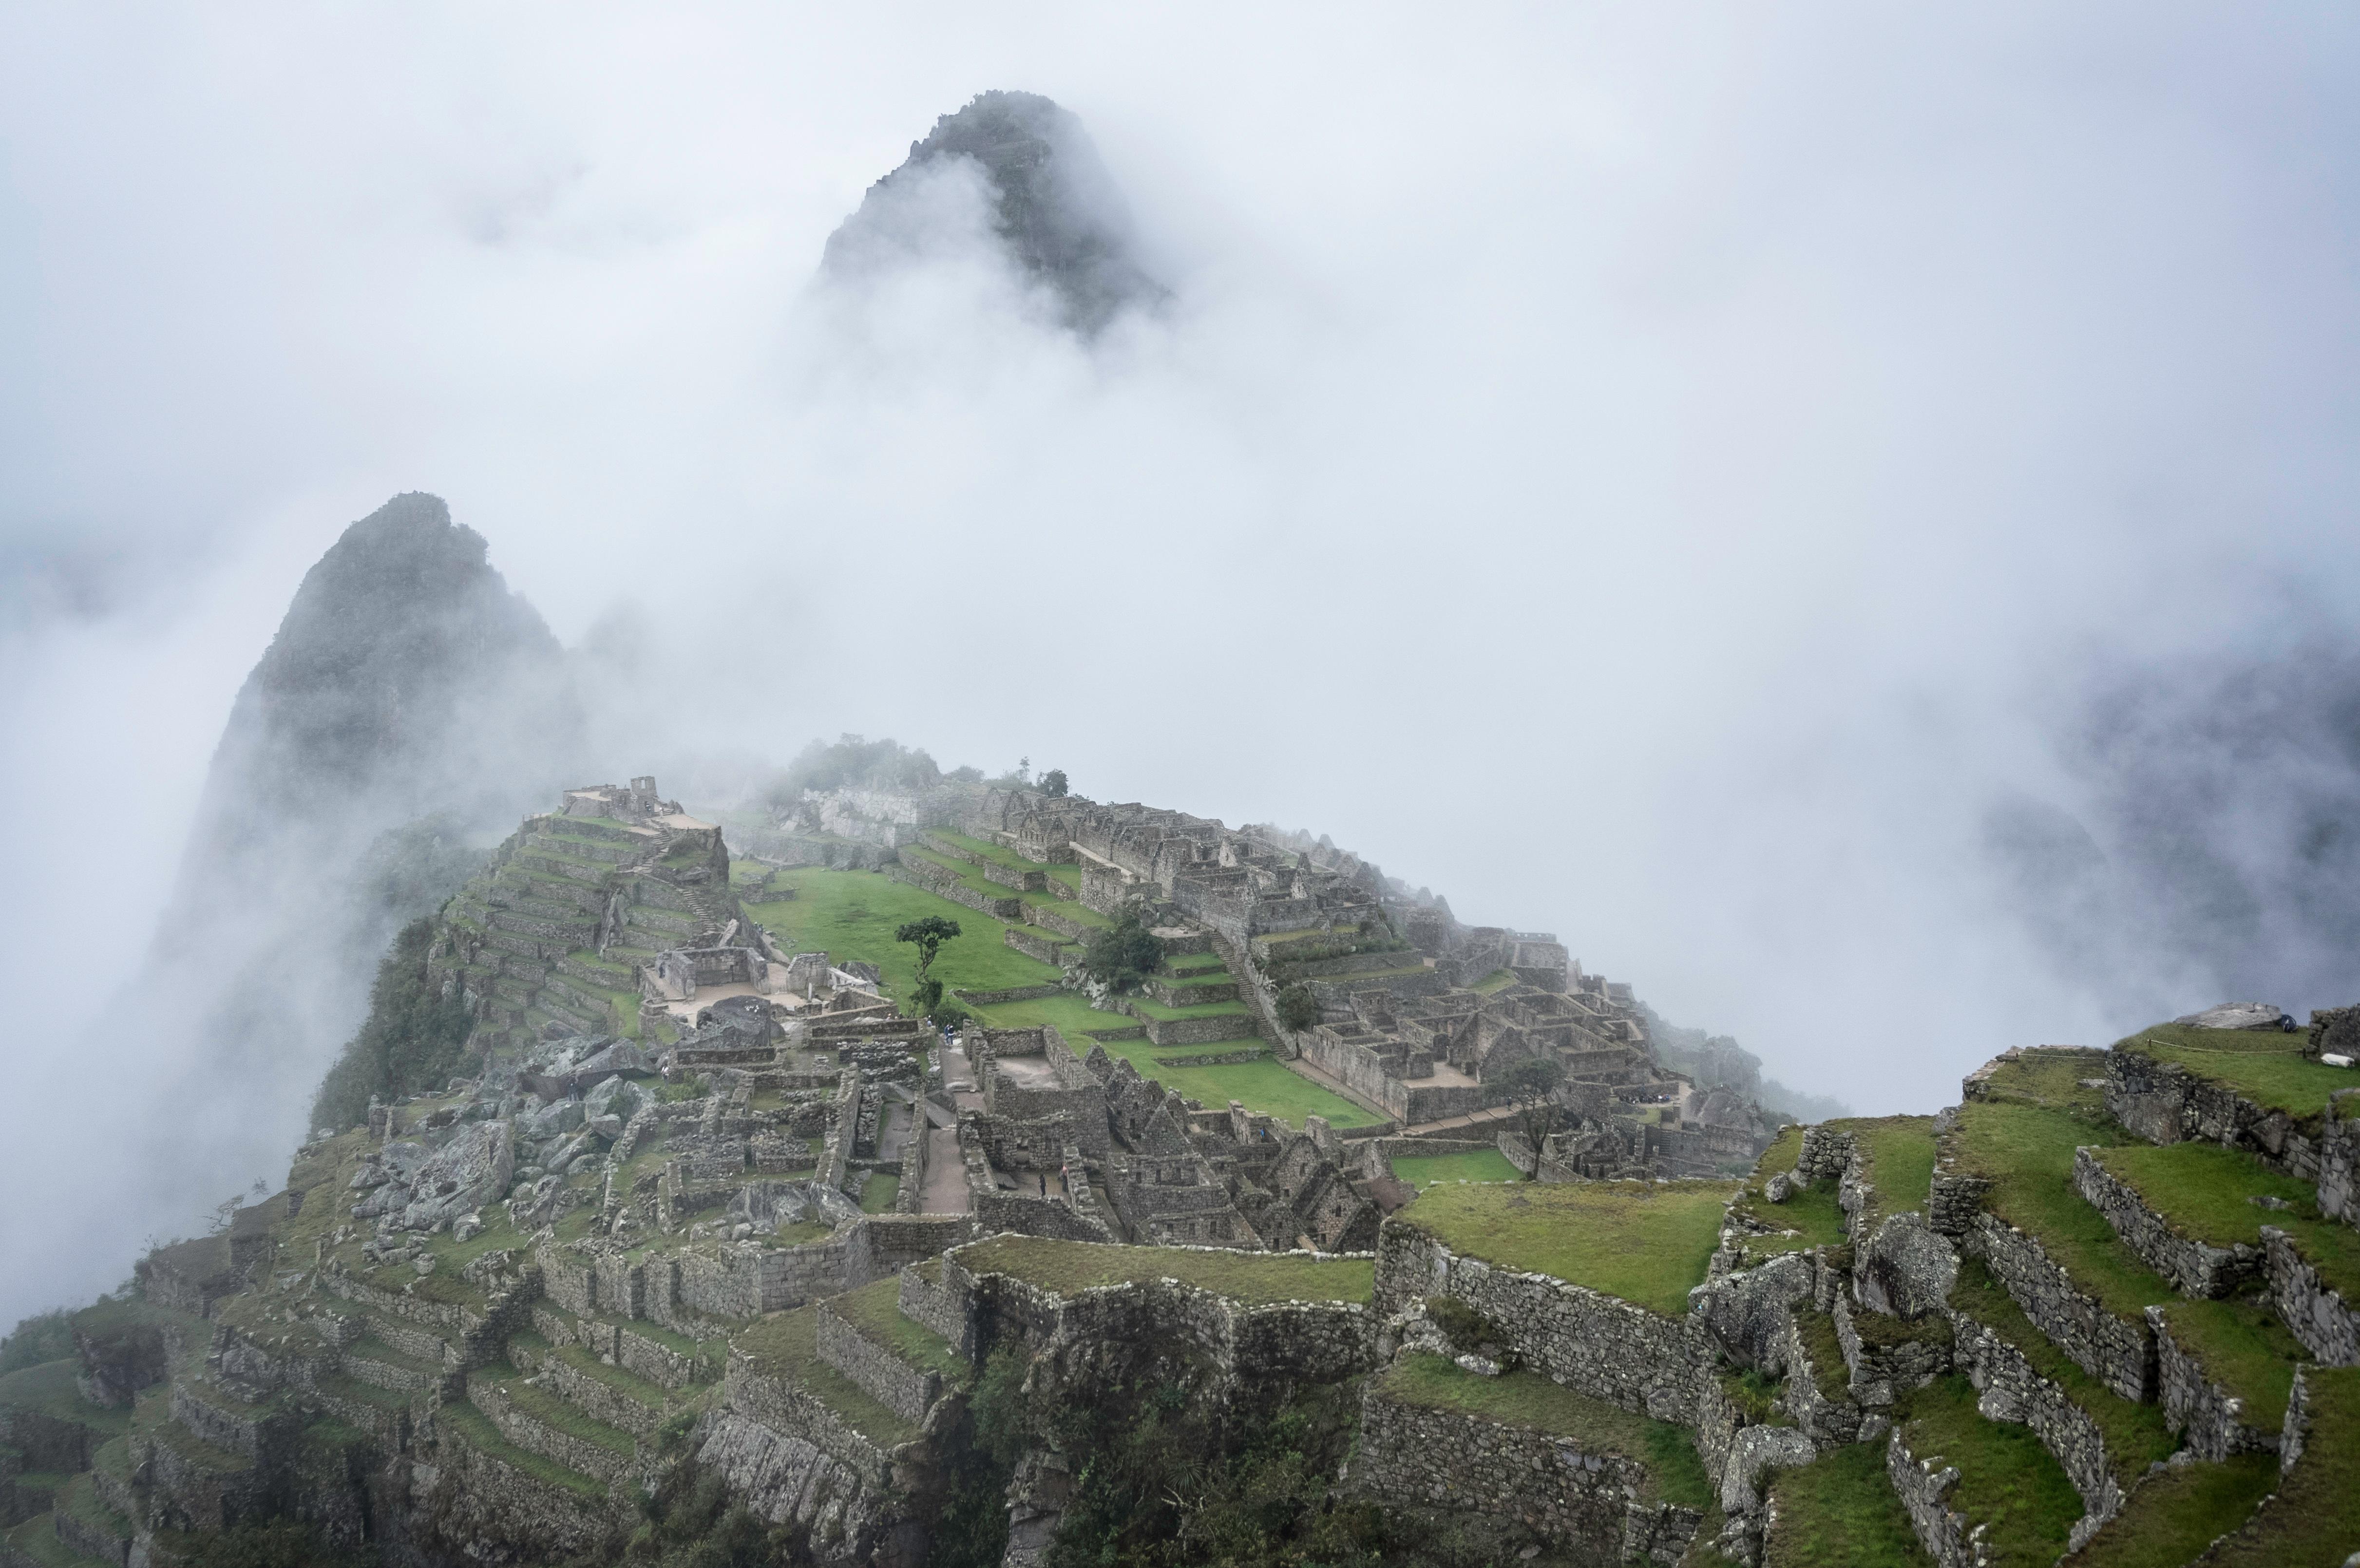 Cloud cover over mountain ruins in south america